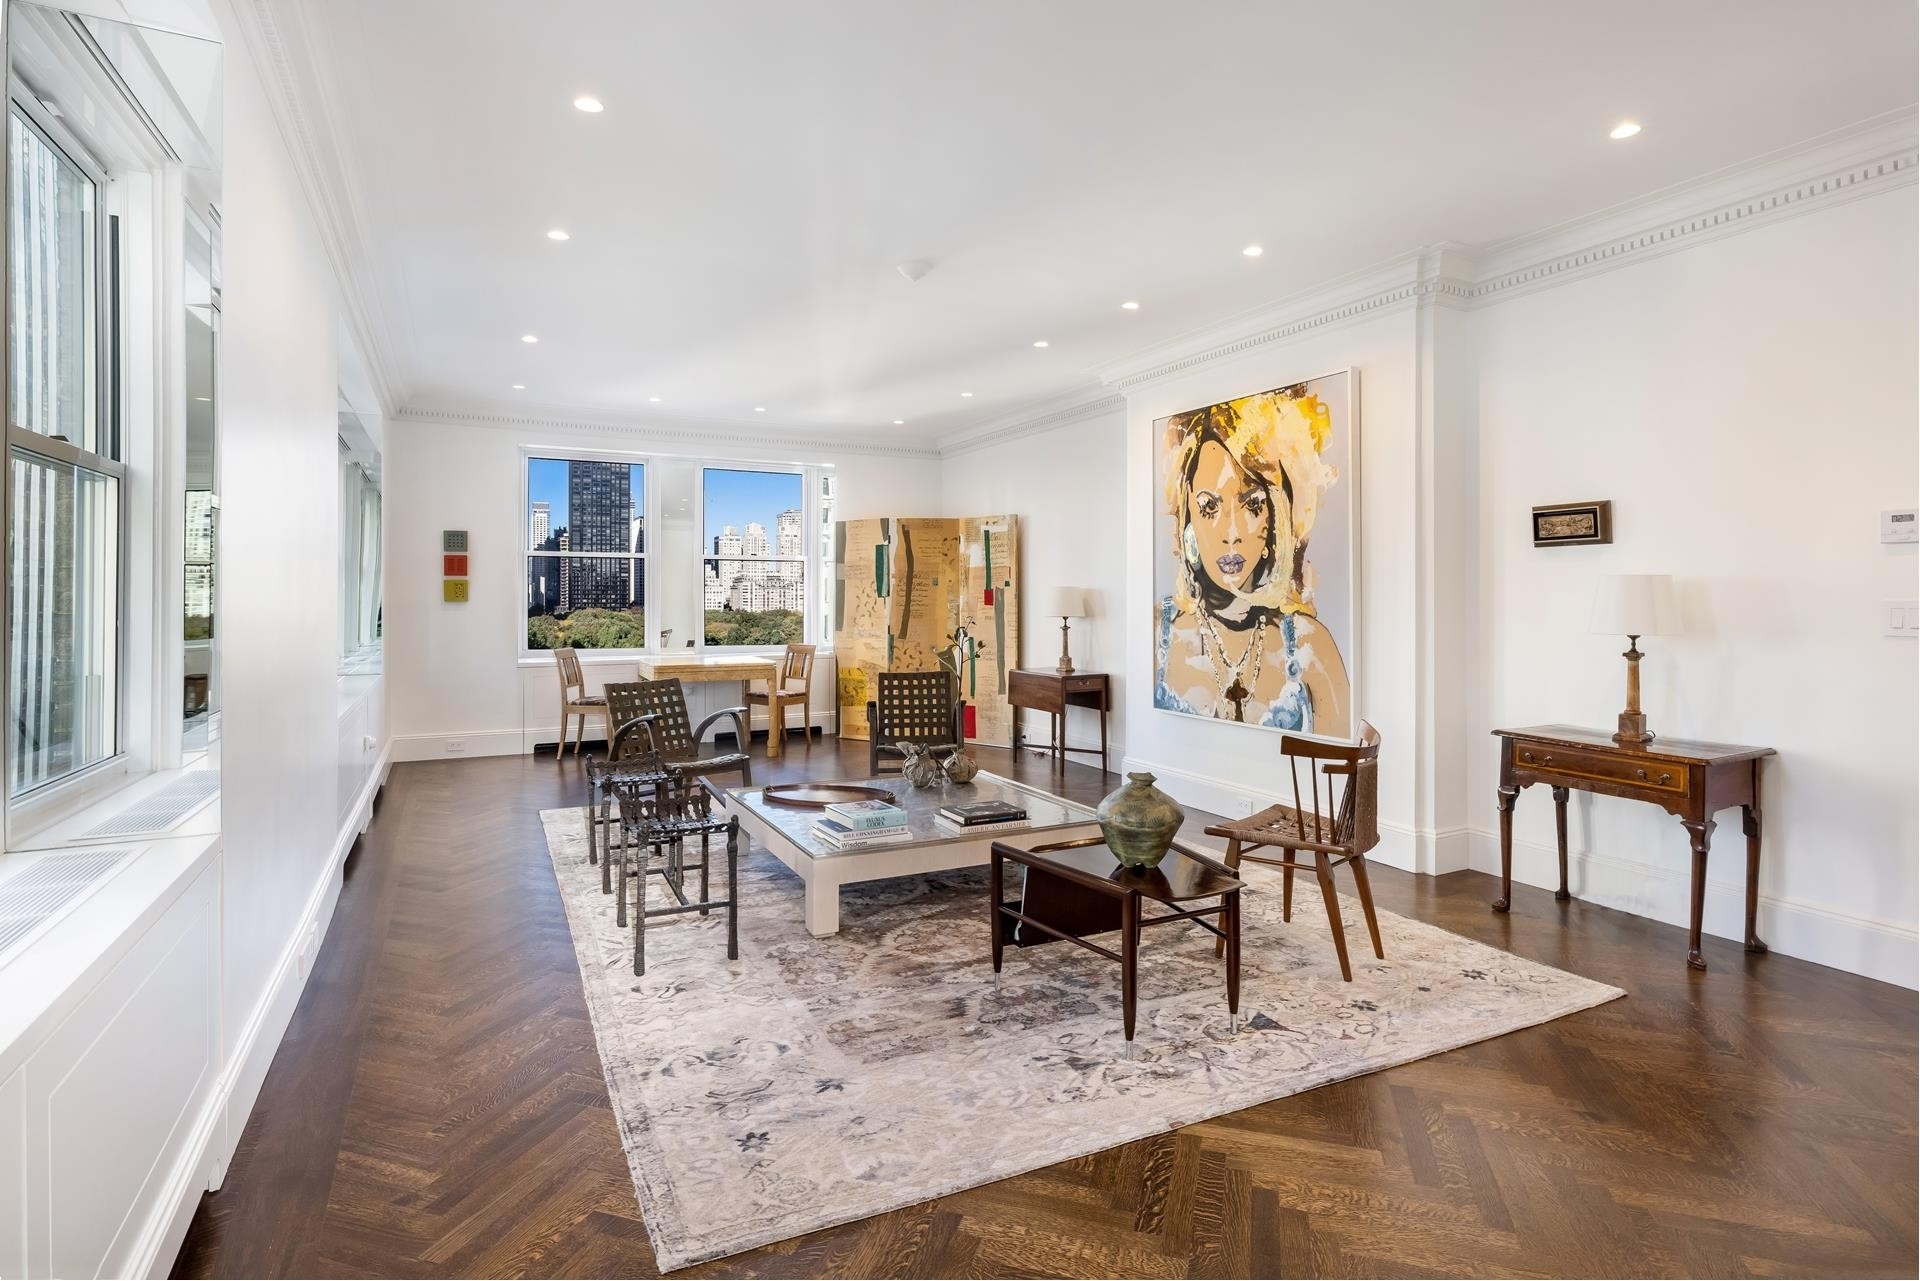 Co-op Properties for Sale at Sherry Netherland, 781 FIFTH AVE, 1205 Lenox Hill, New York, NY 10022